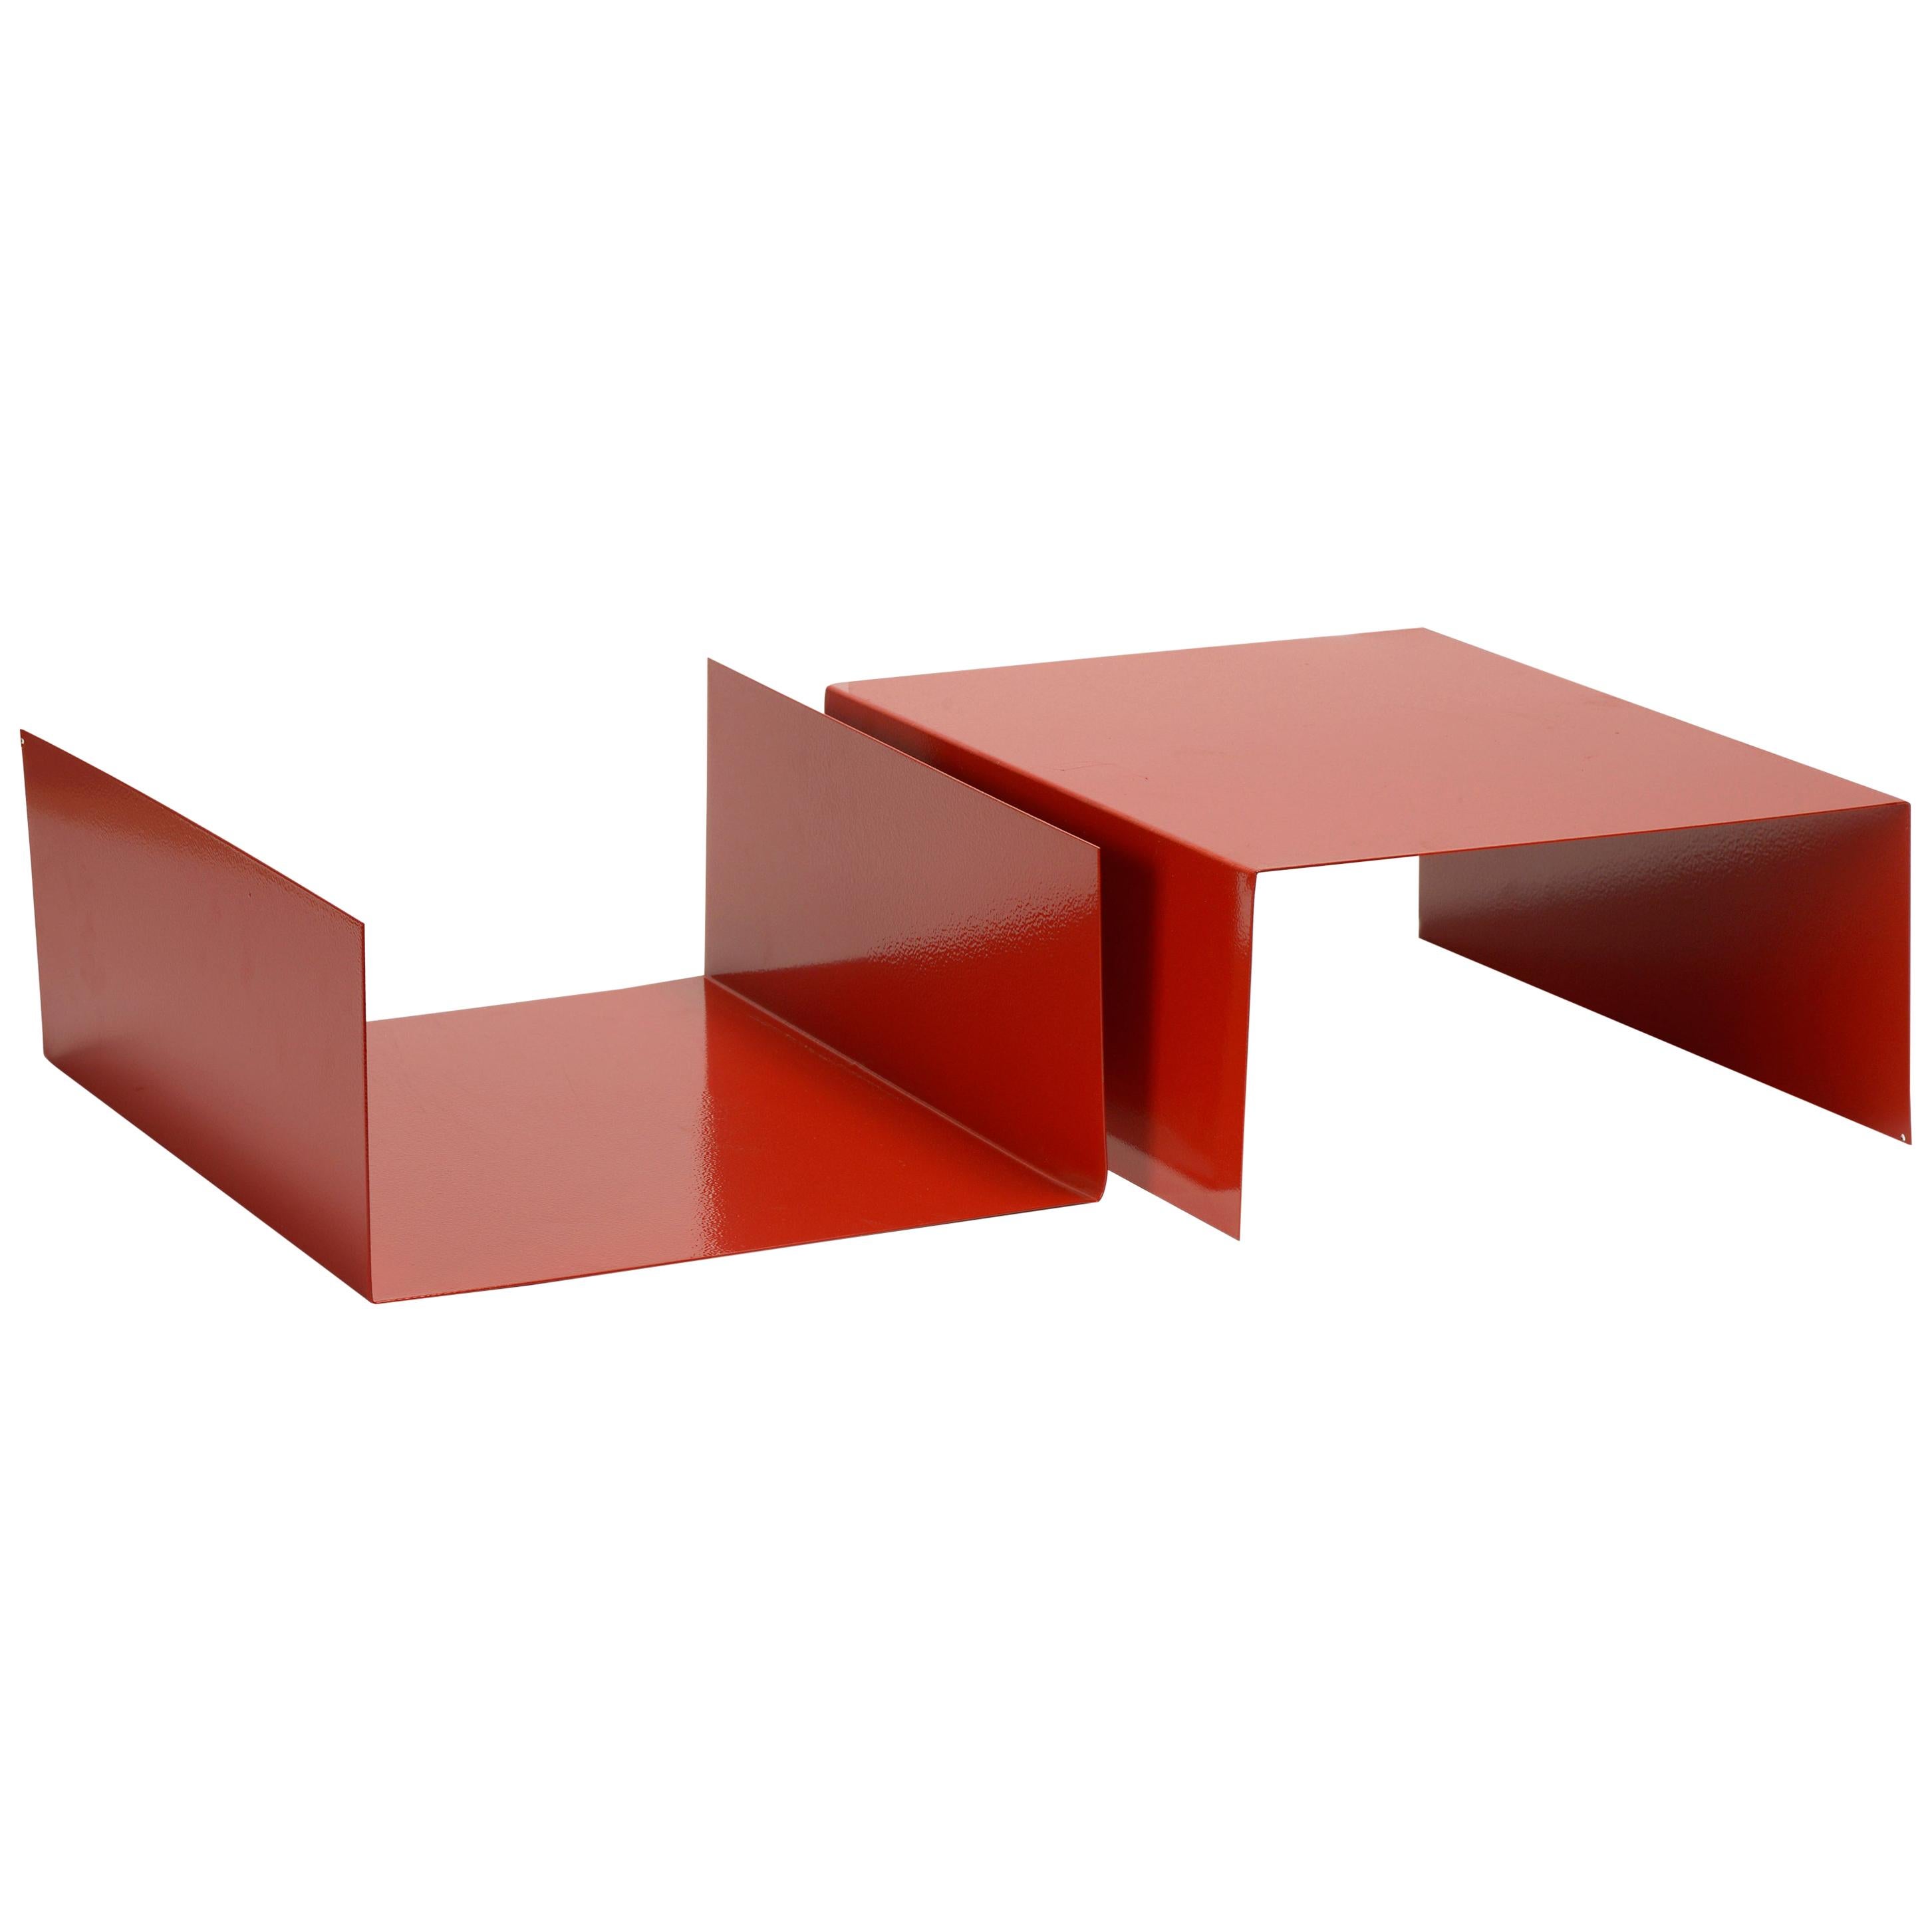 Pair of 1960s Aluminum Paper Trays or Bookends Refinished in Red